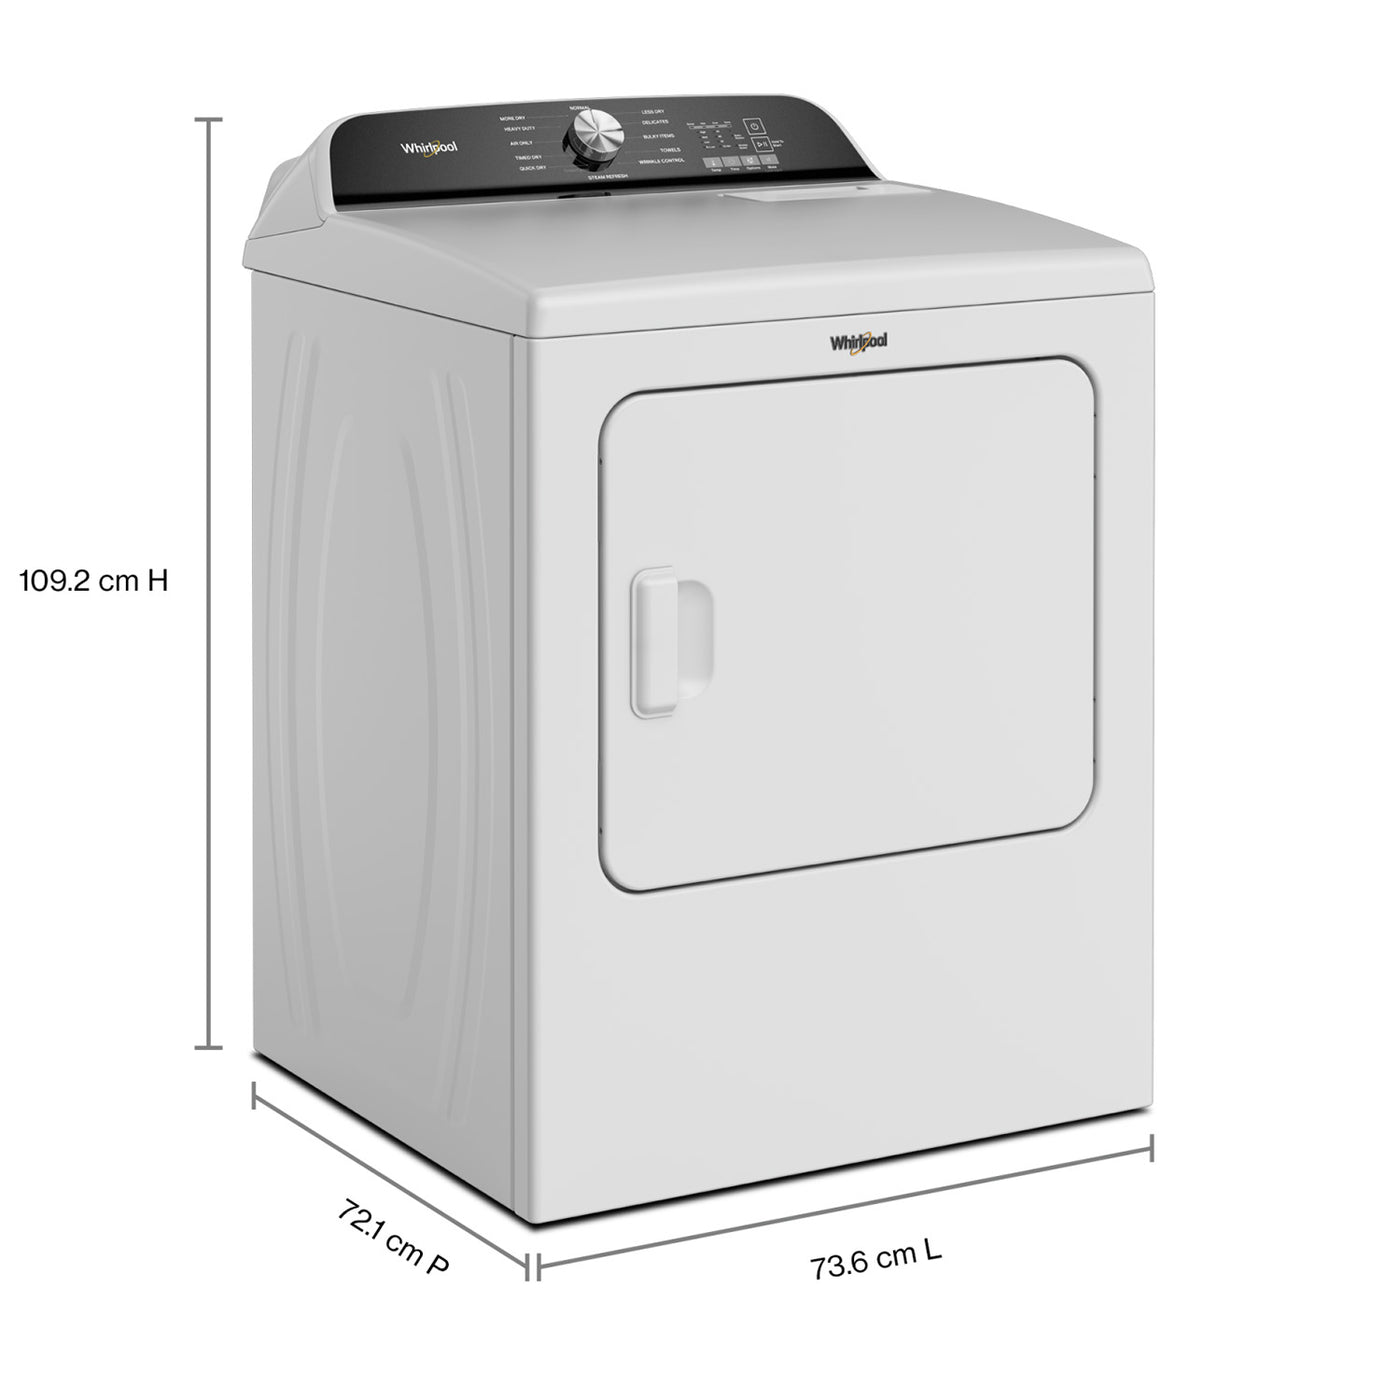 Whirlpool White Electric Dryer (7.0 Cu Ft) - YWED6150PW